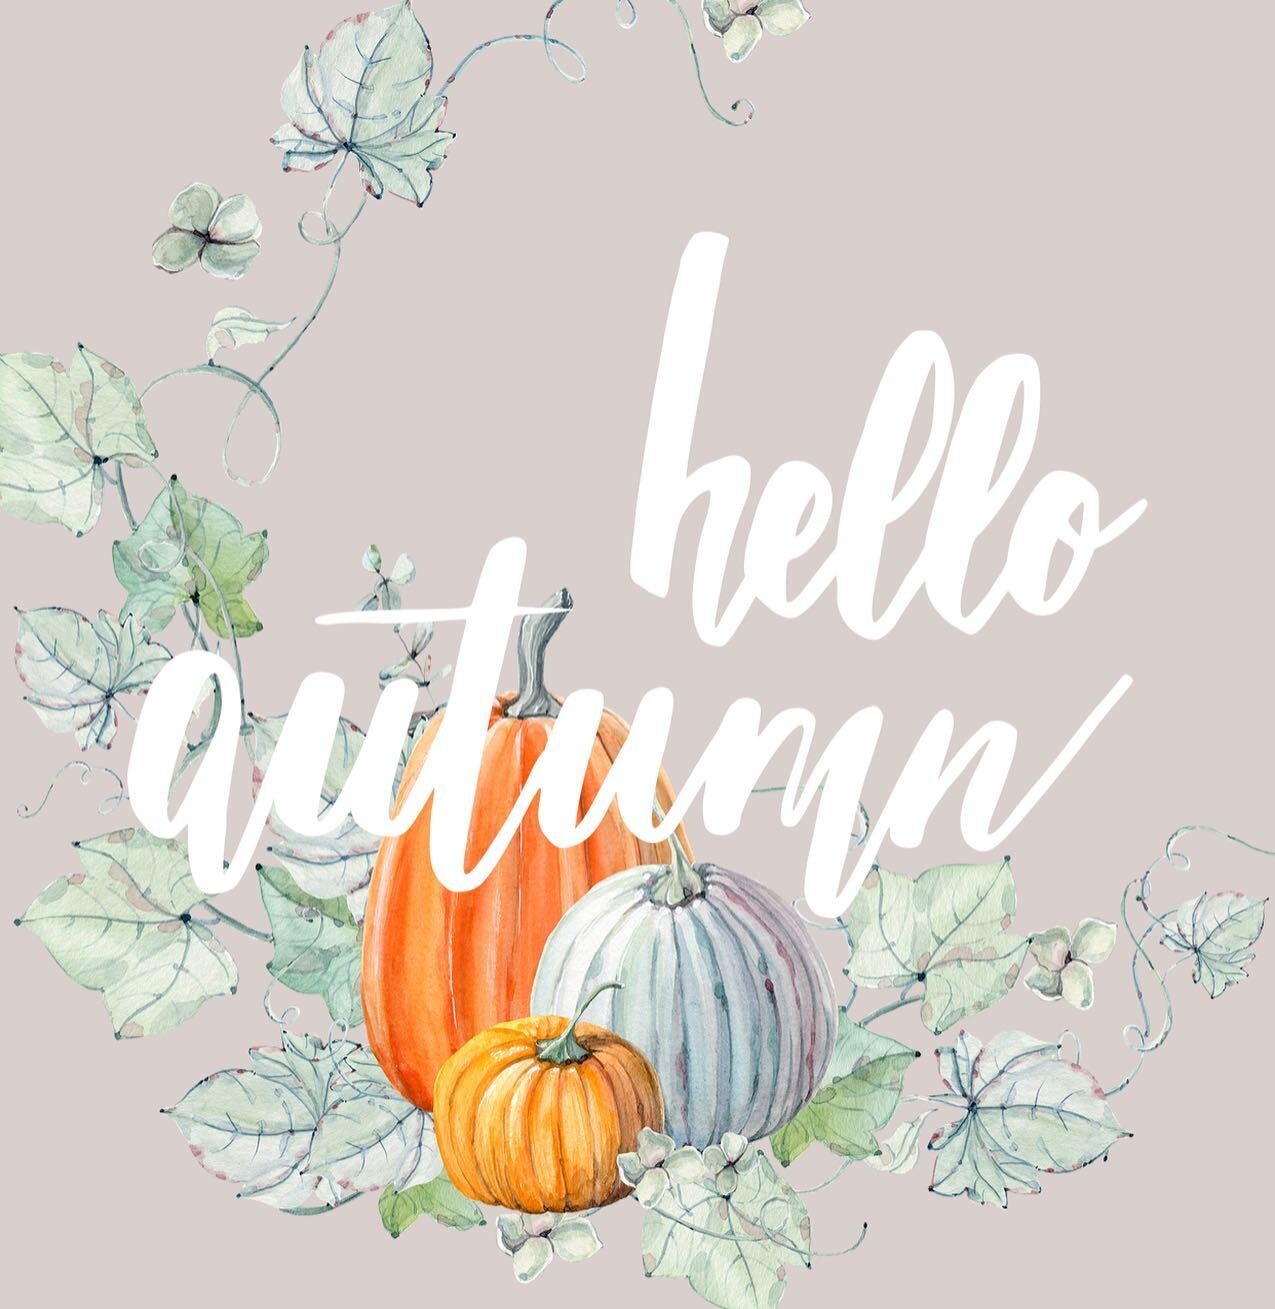 TO HELP GET YOUR SKIN AUTUMN/WINTER READY, 🍁🍂
THERE WILL BE SOME EXCLUSIVE OFFERS ON THIS MONTH. 

Specials will be announced 5PM TODAY. 
#hiddenbeauty
#enhanceyourtruebeauty
#lovetheskinyourin
#skincarespecialist
#advancebeauty
#elemisskincare
#el